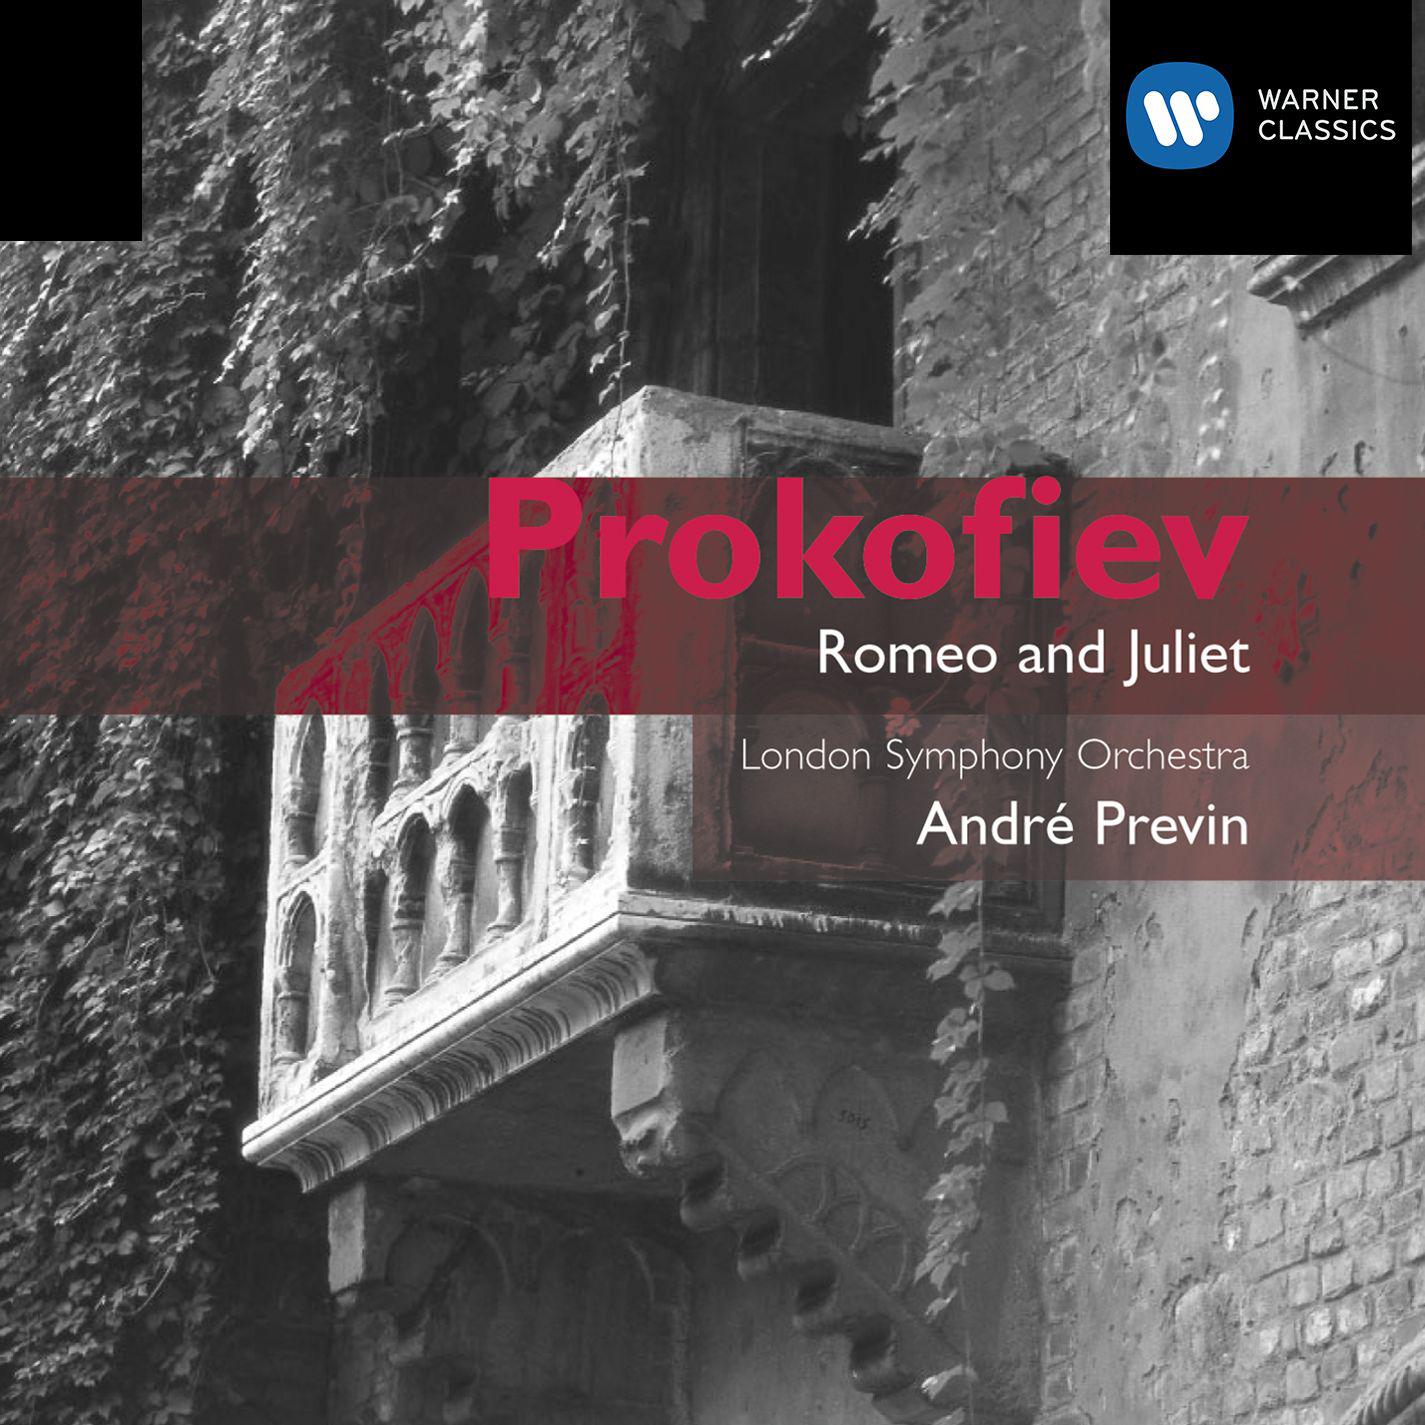 Romeo and Juliet (Complete Ballet), Op. 64, Act 2:No. 29, Juliet with Friar Laurence